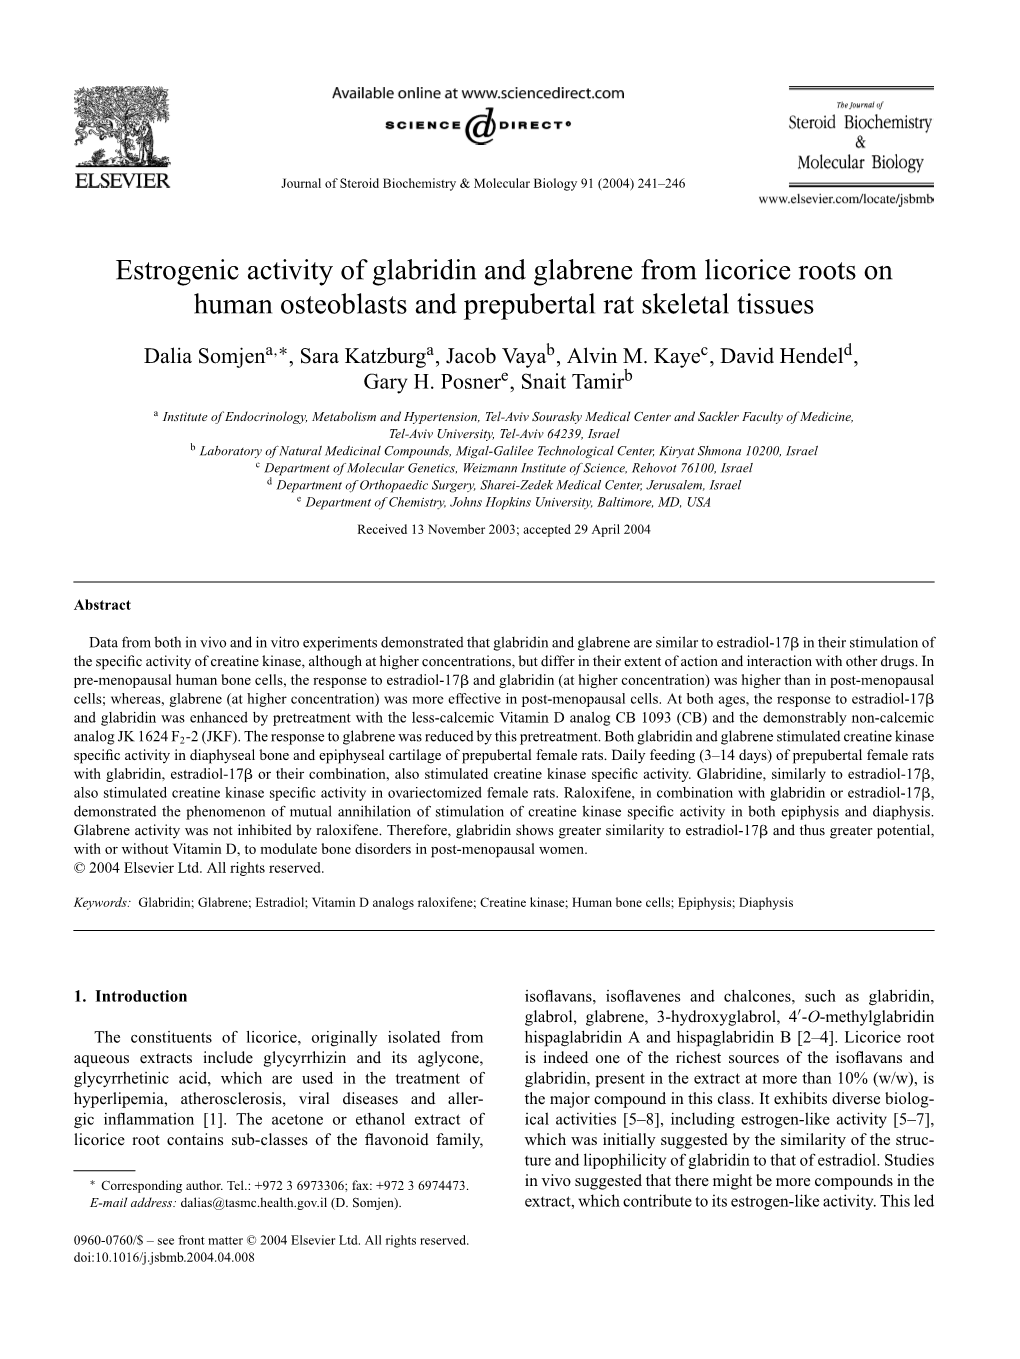 Estrogenic Activity of Glabridin and Glabrene from Licorice Roots on Human Osteoblasts and Prepubertal Rat Skeletal Tissues